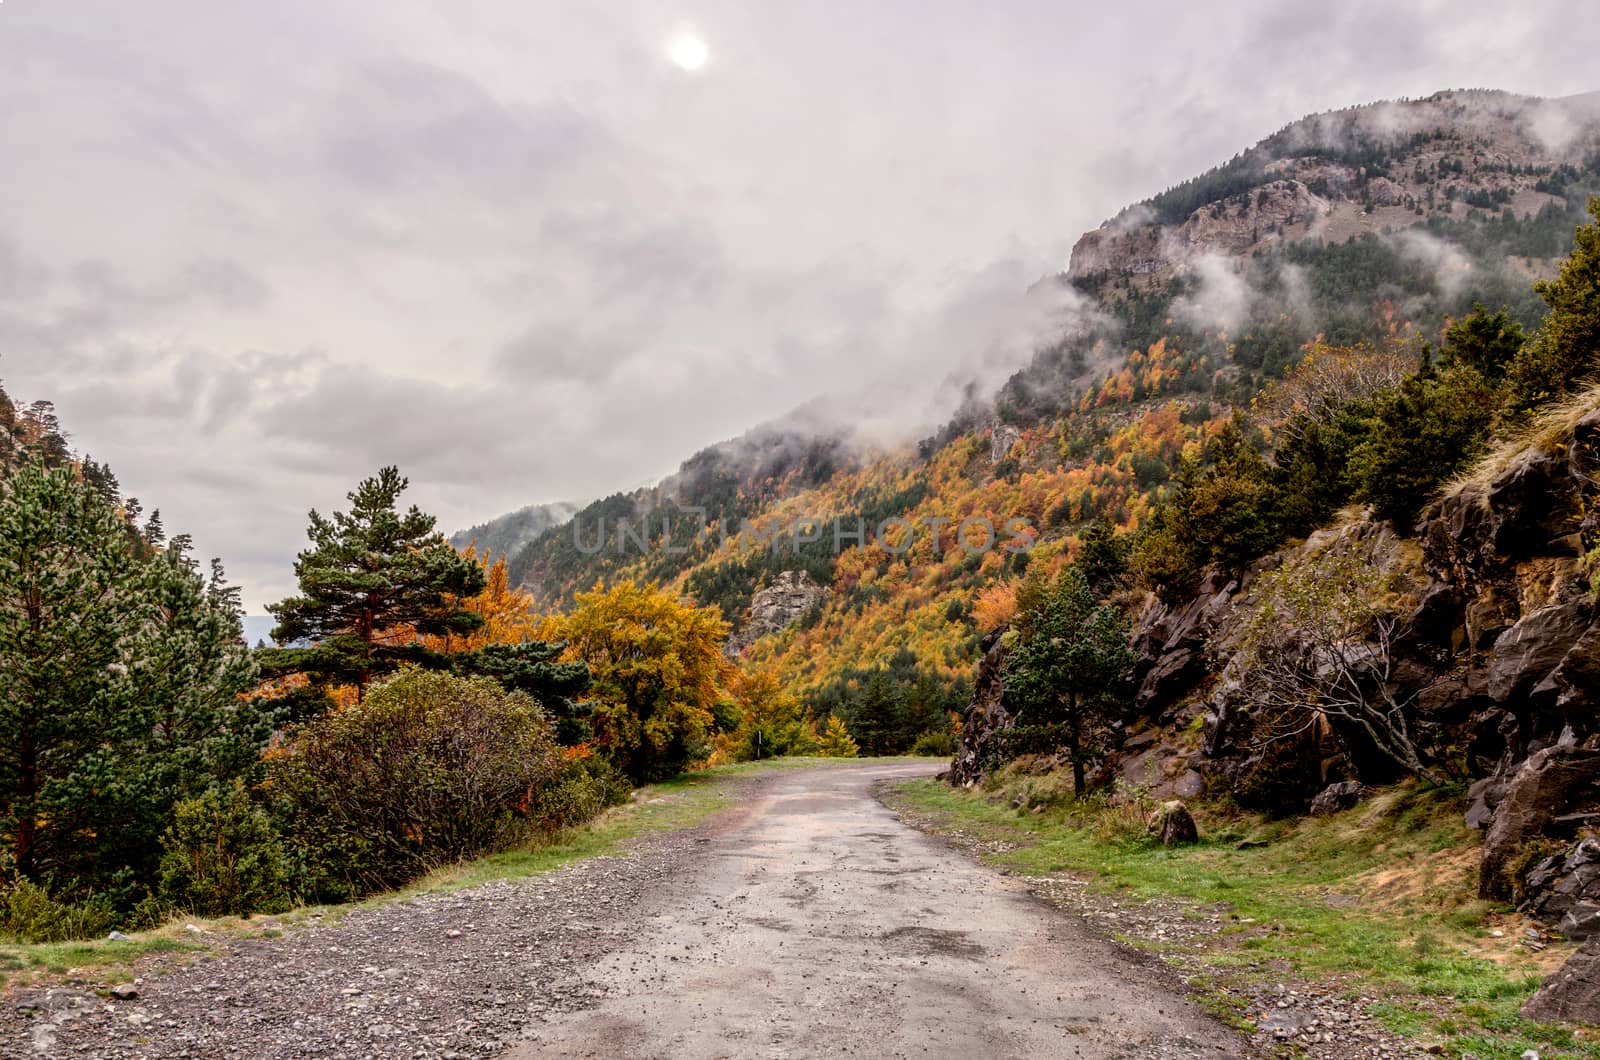 Autumn in the Pyrenees by TilyoRusev